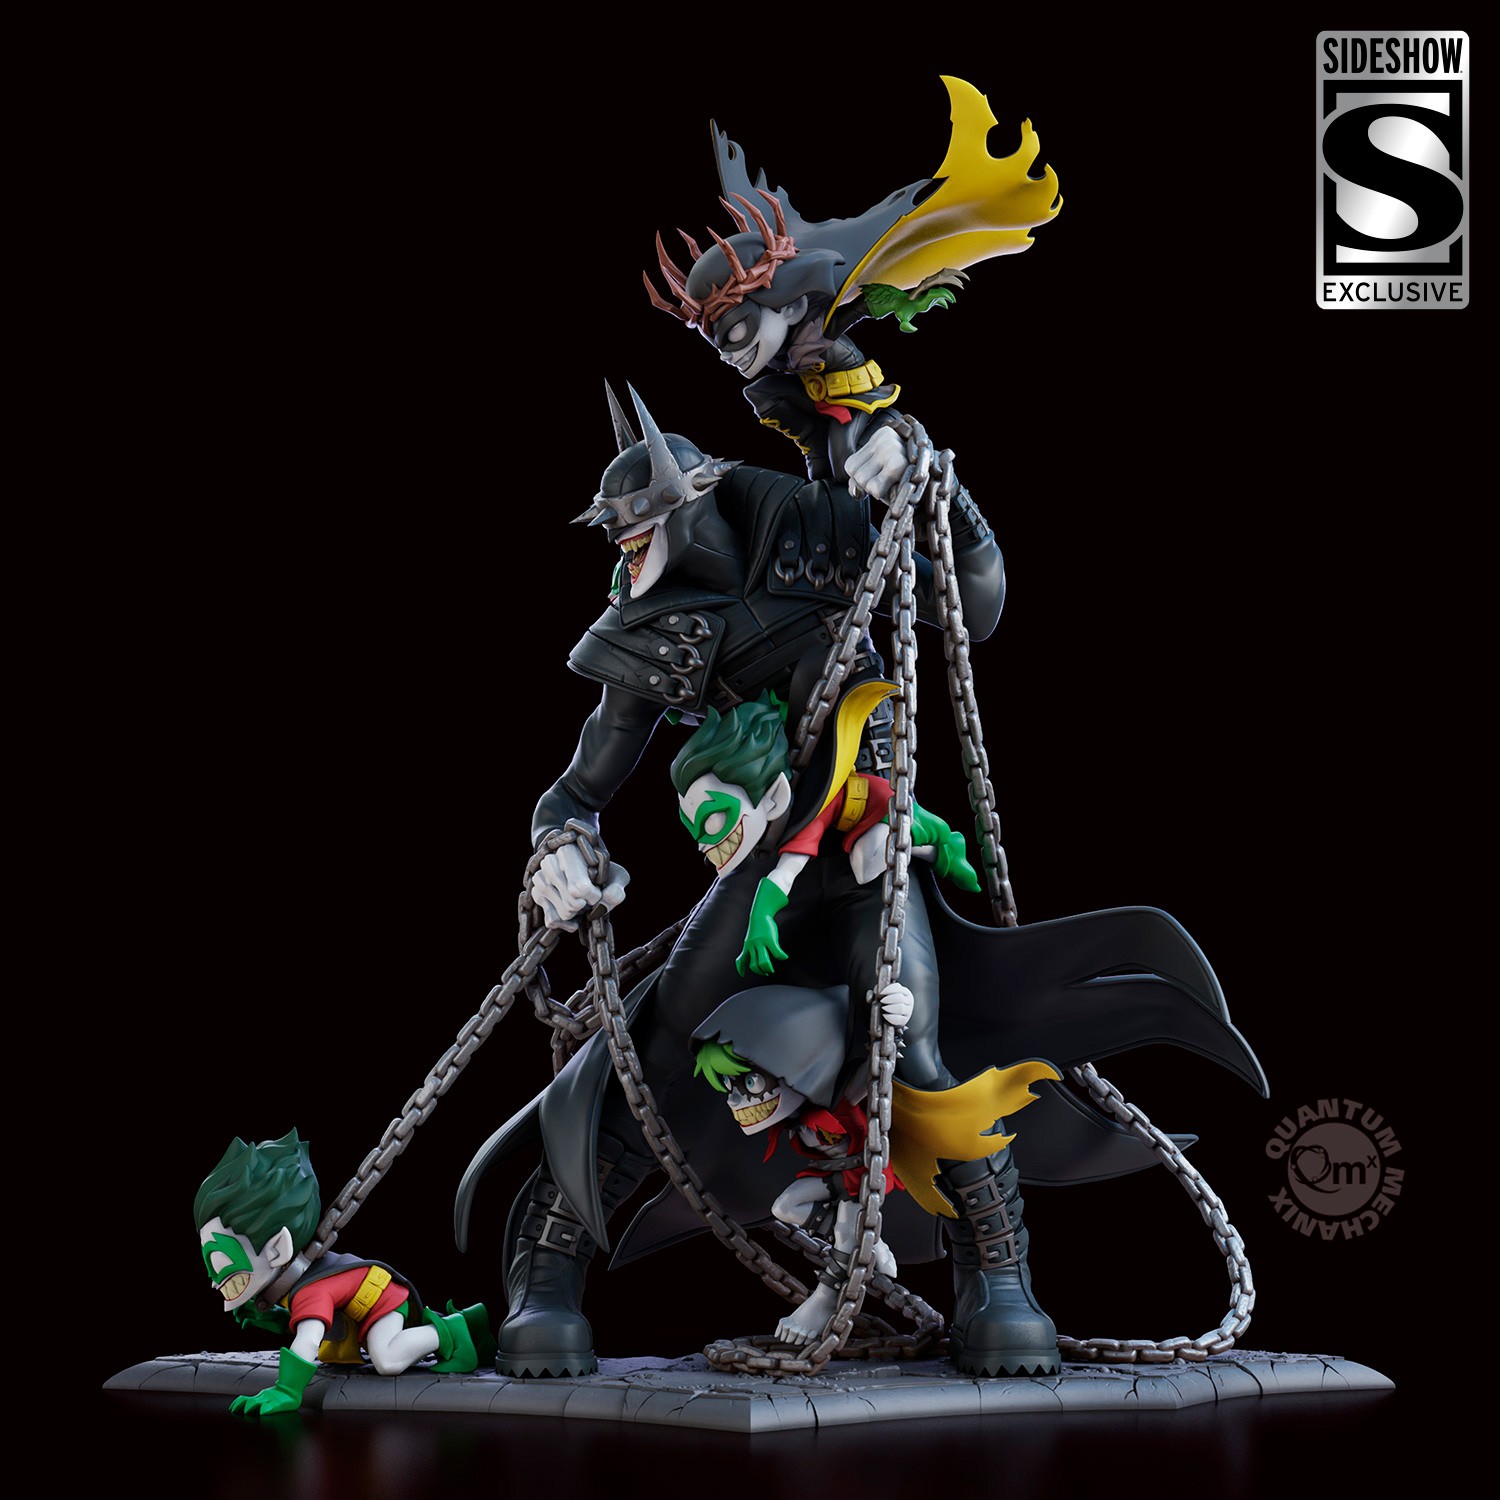 Batman Who Laughs (Artist Edition) Q-Master Exclusive Edition (Prototype Shown) View 4